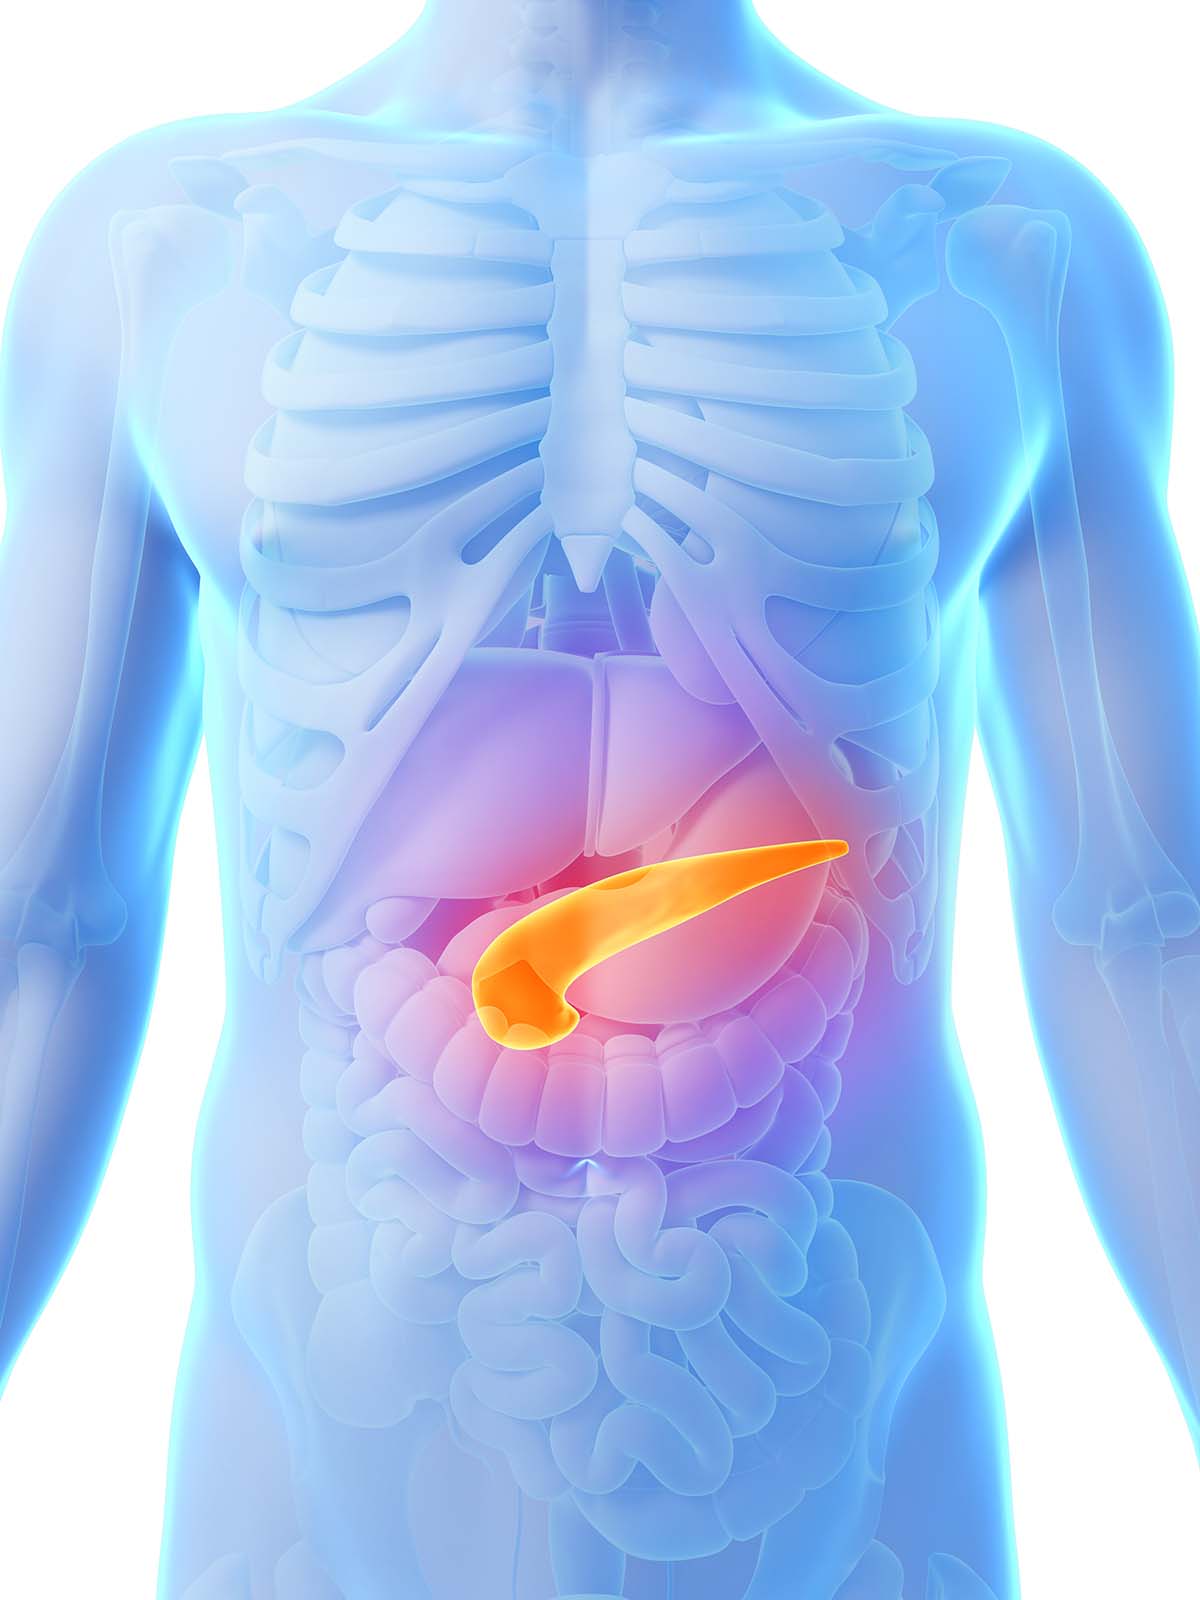 Illustrated human torso with the pancreas highlighted in orange to show where it is located in the human body